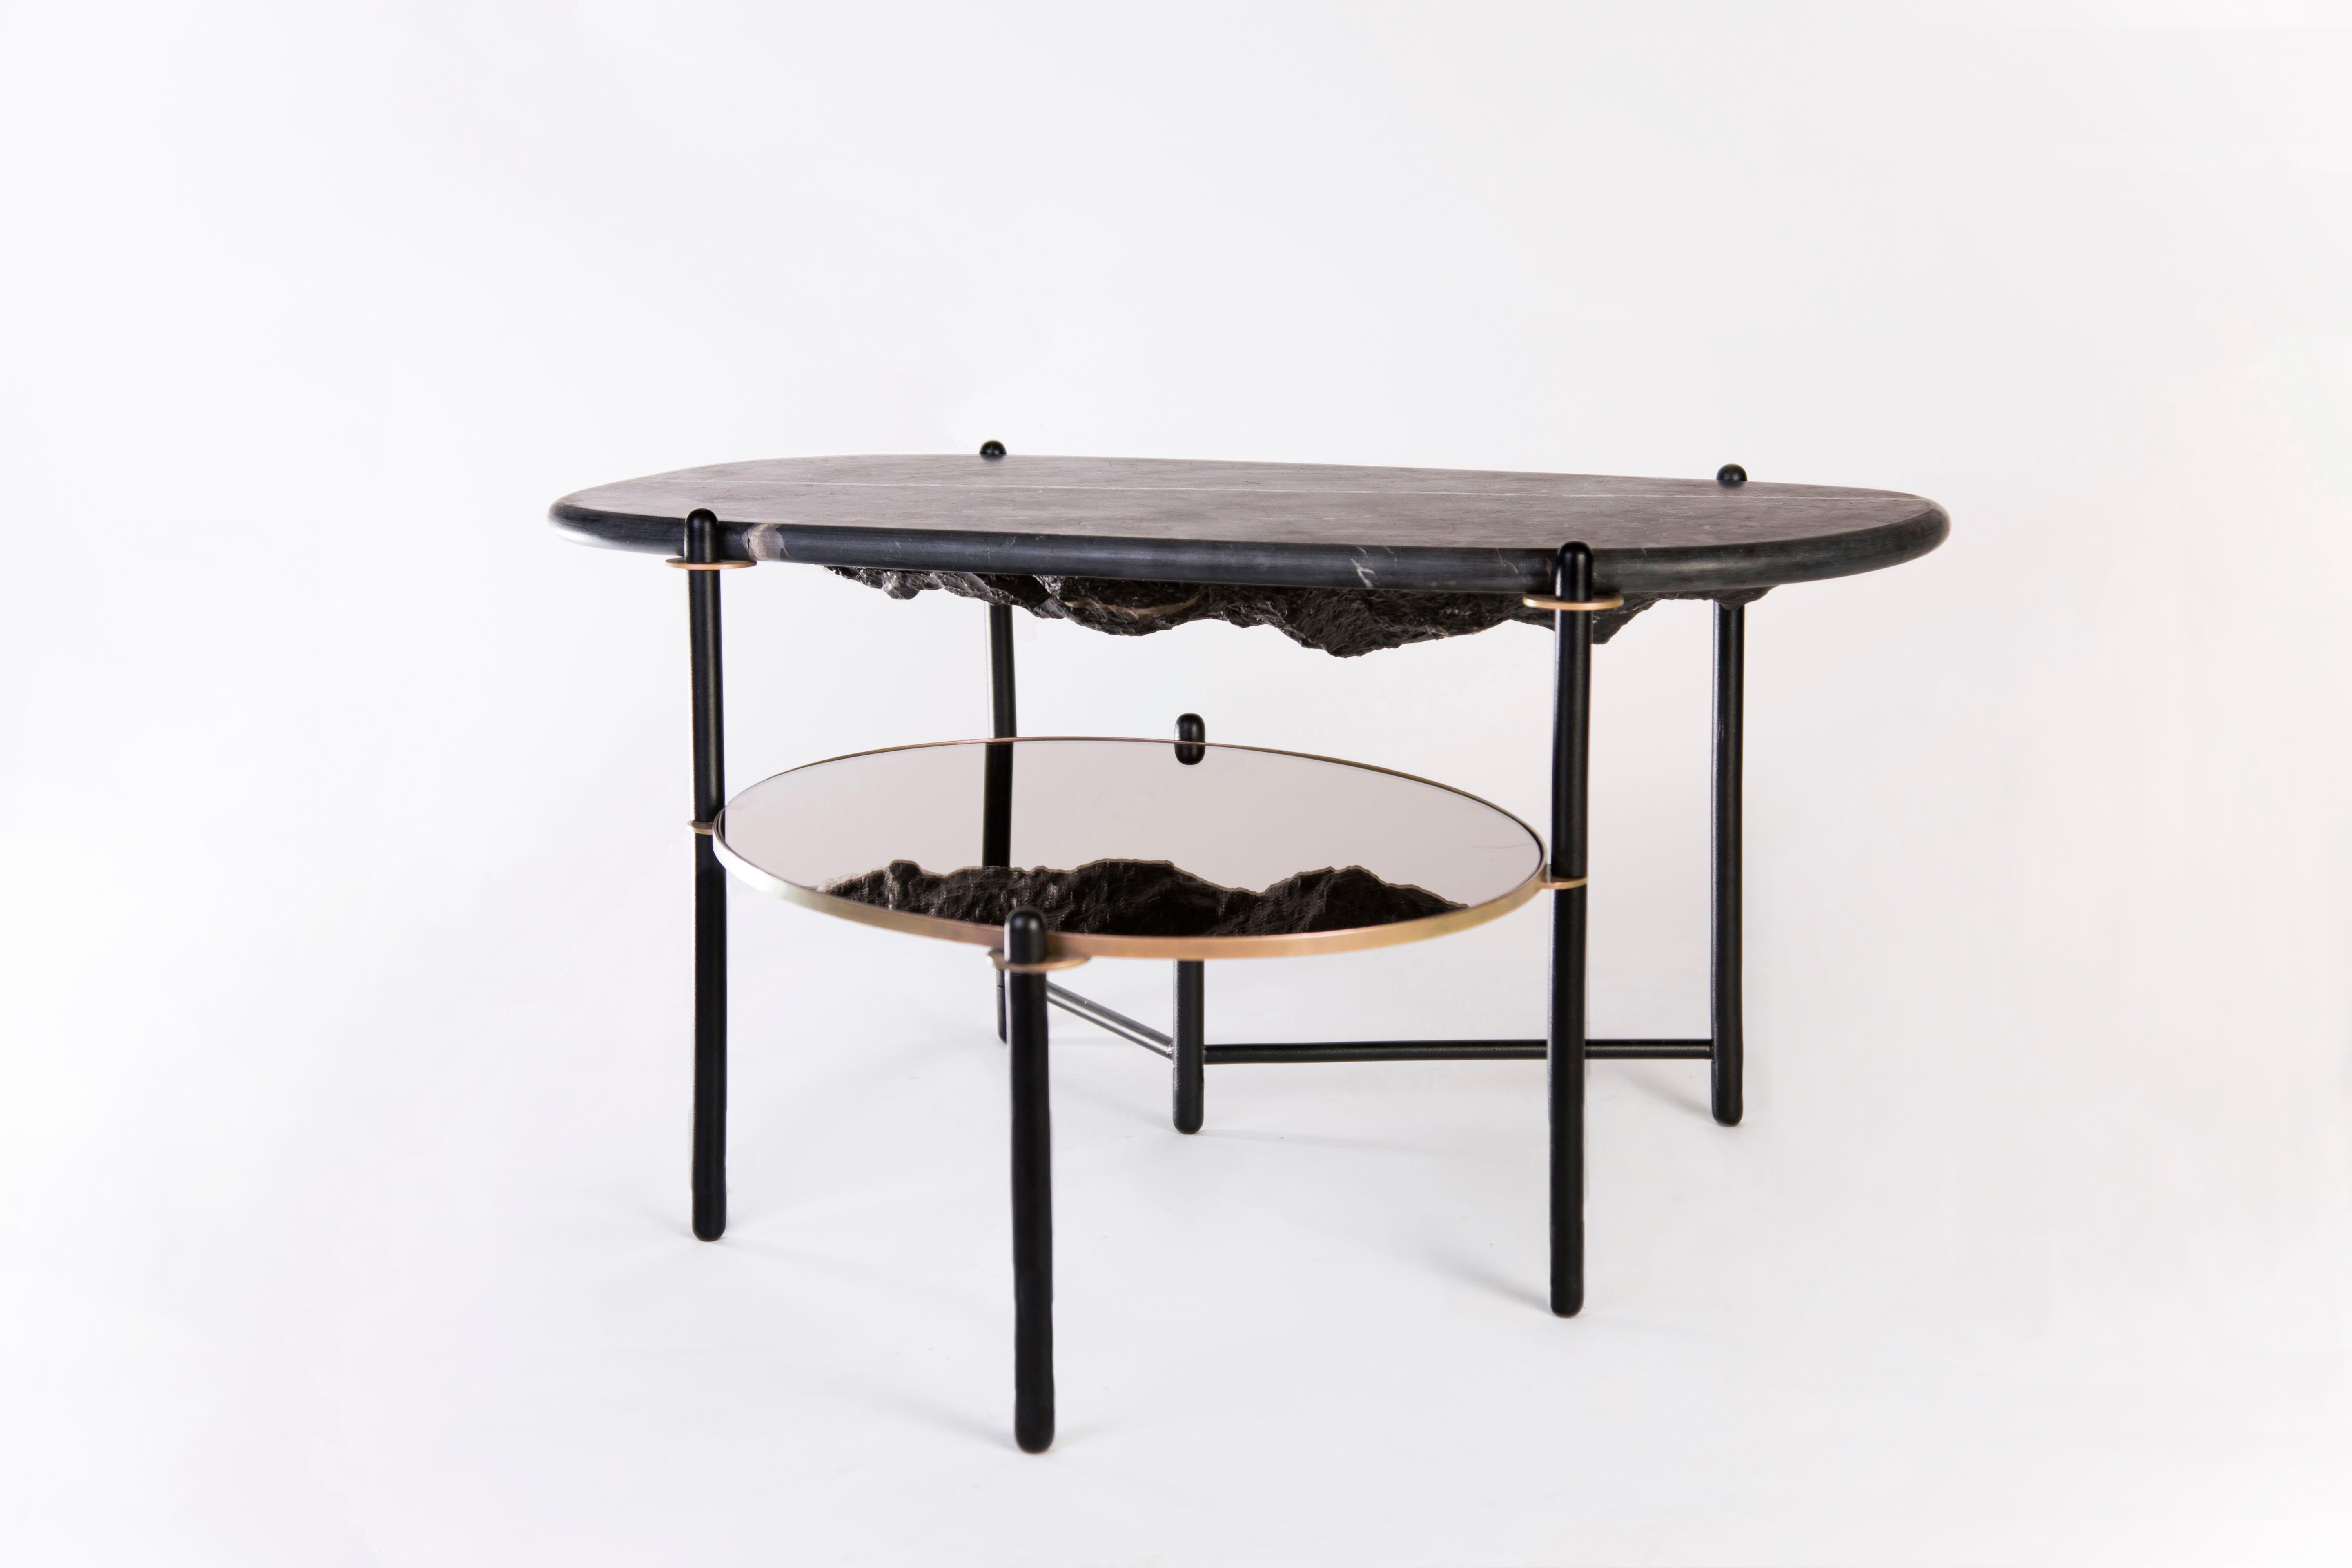 Mountain coffee table by Comité de Proyectos
Dimensions: large: 120 x 100 x H 46 cm 
Materials: polished marble top, mirror, machined and electro-painted cold roll bars.

The table has a polished marble top, and carved on the back is a mountain